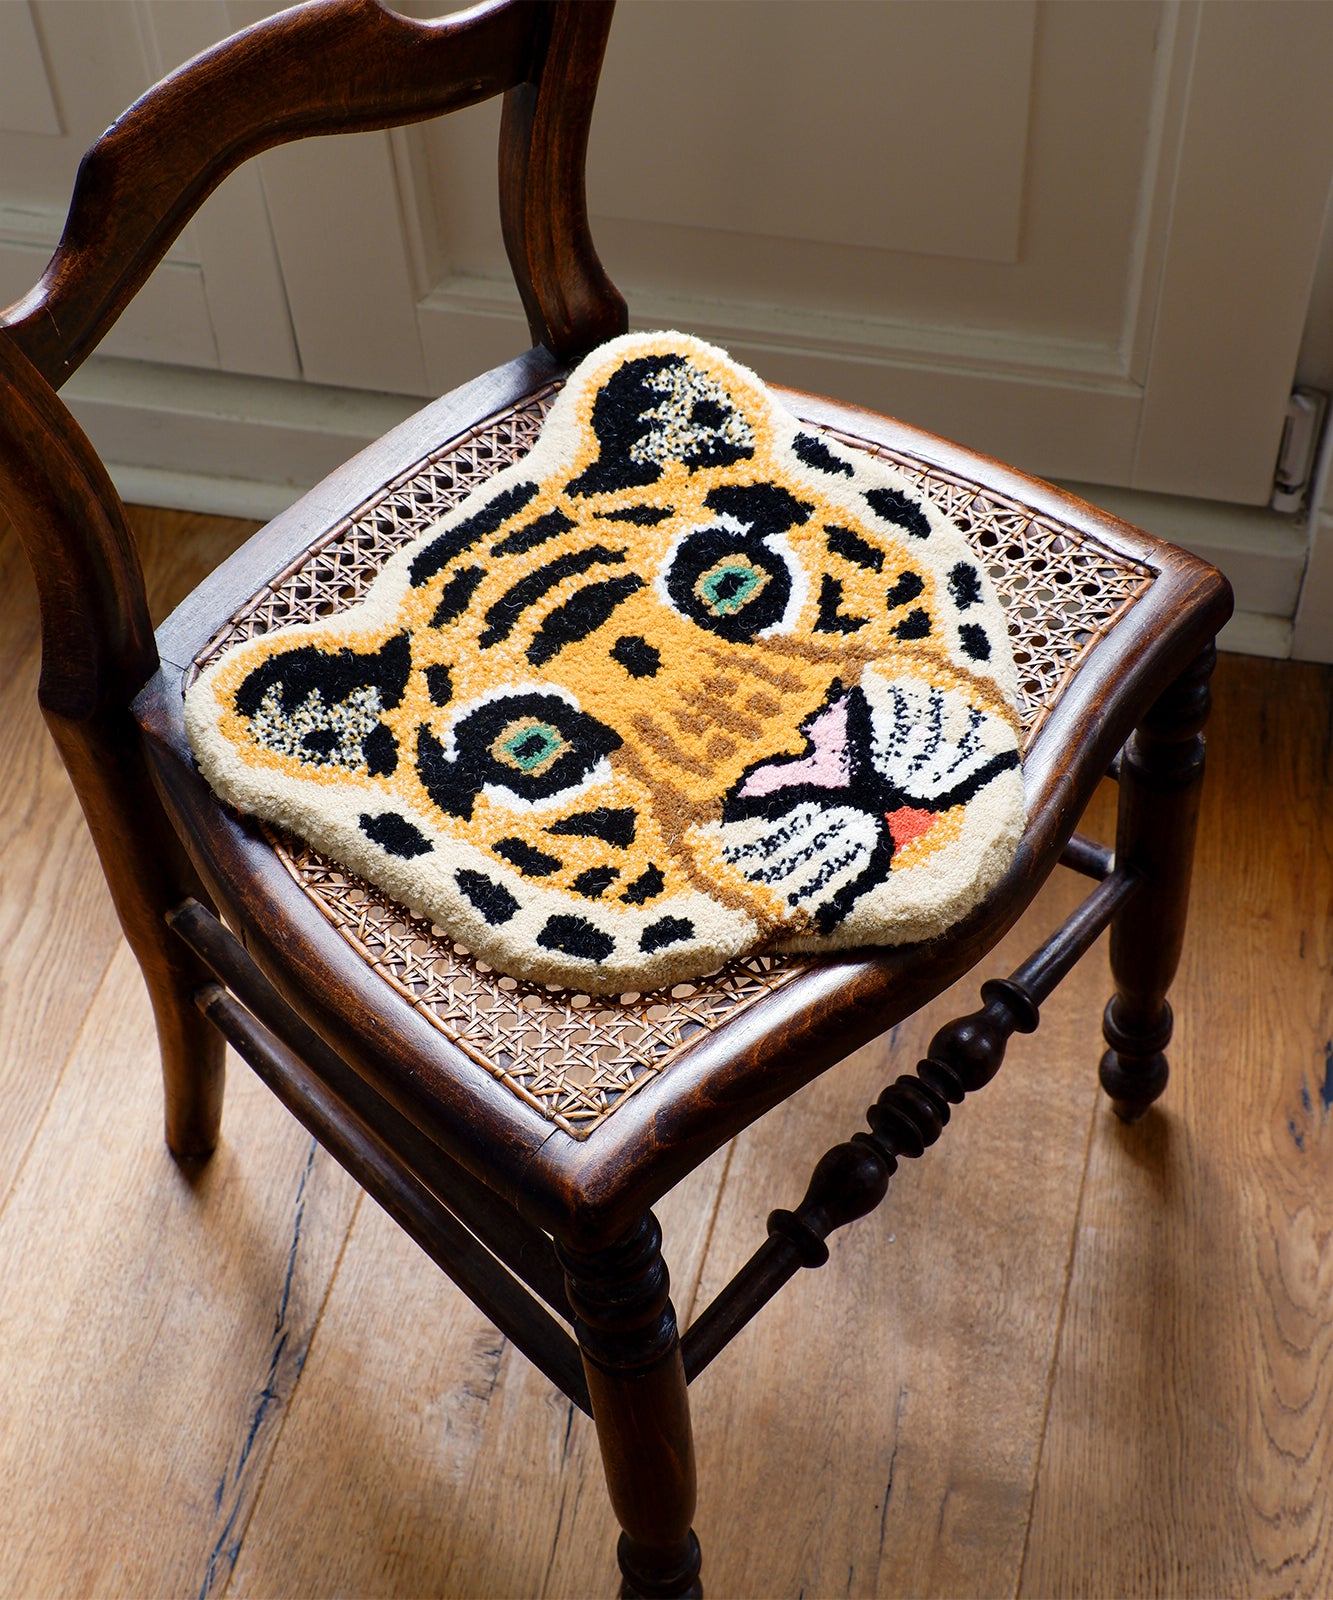 Doing Goods Cloudy Tiger Head Rug